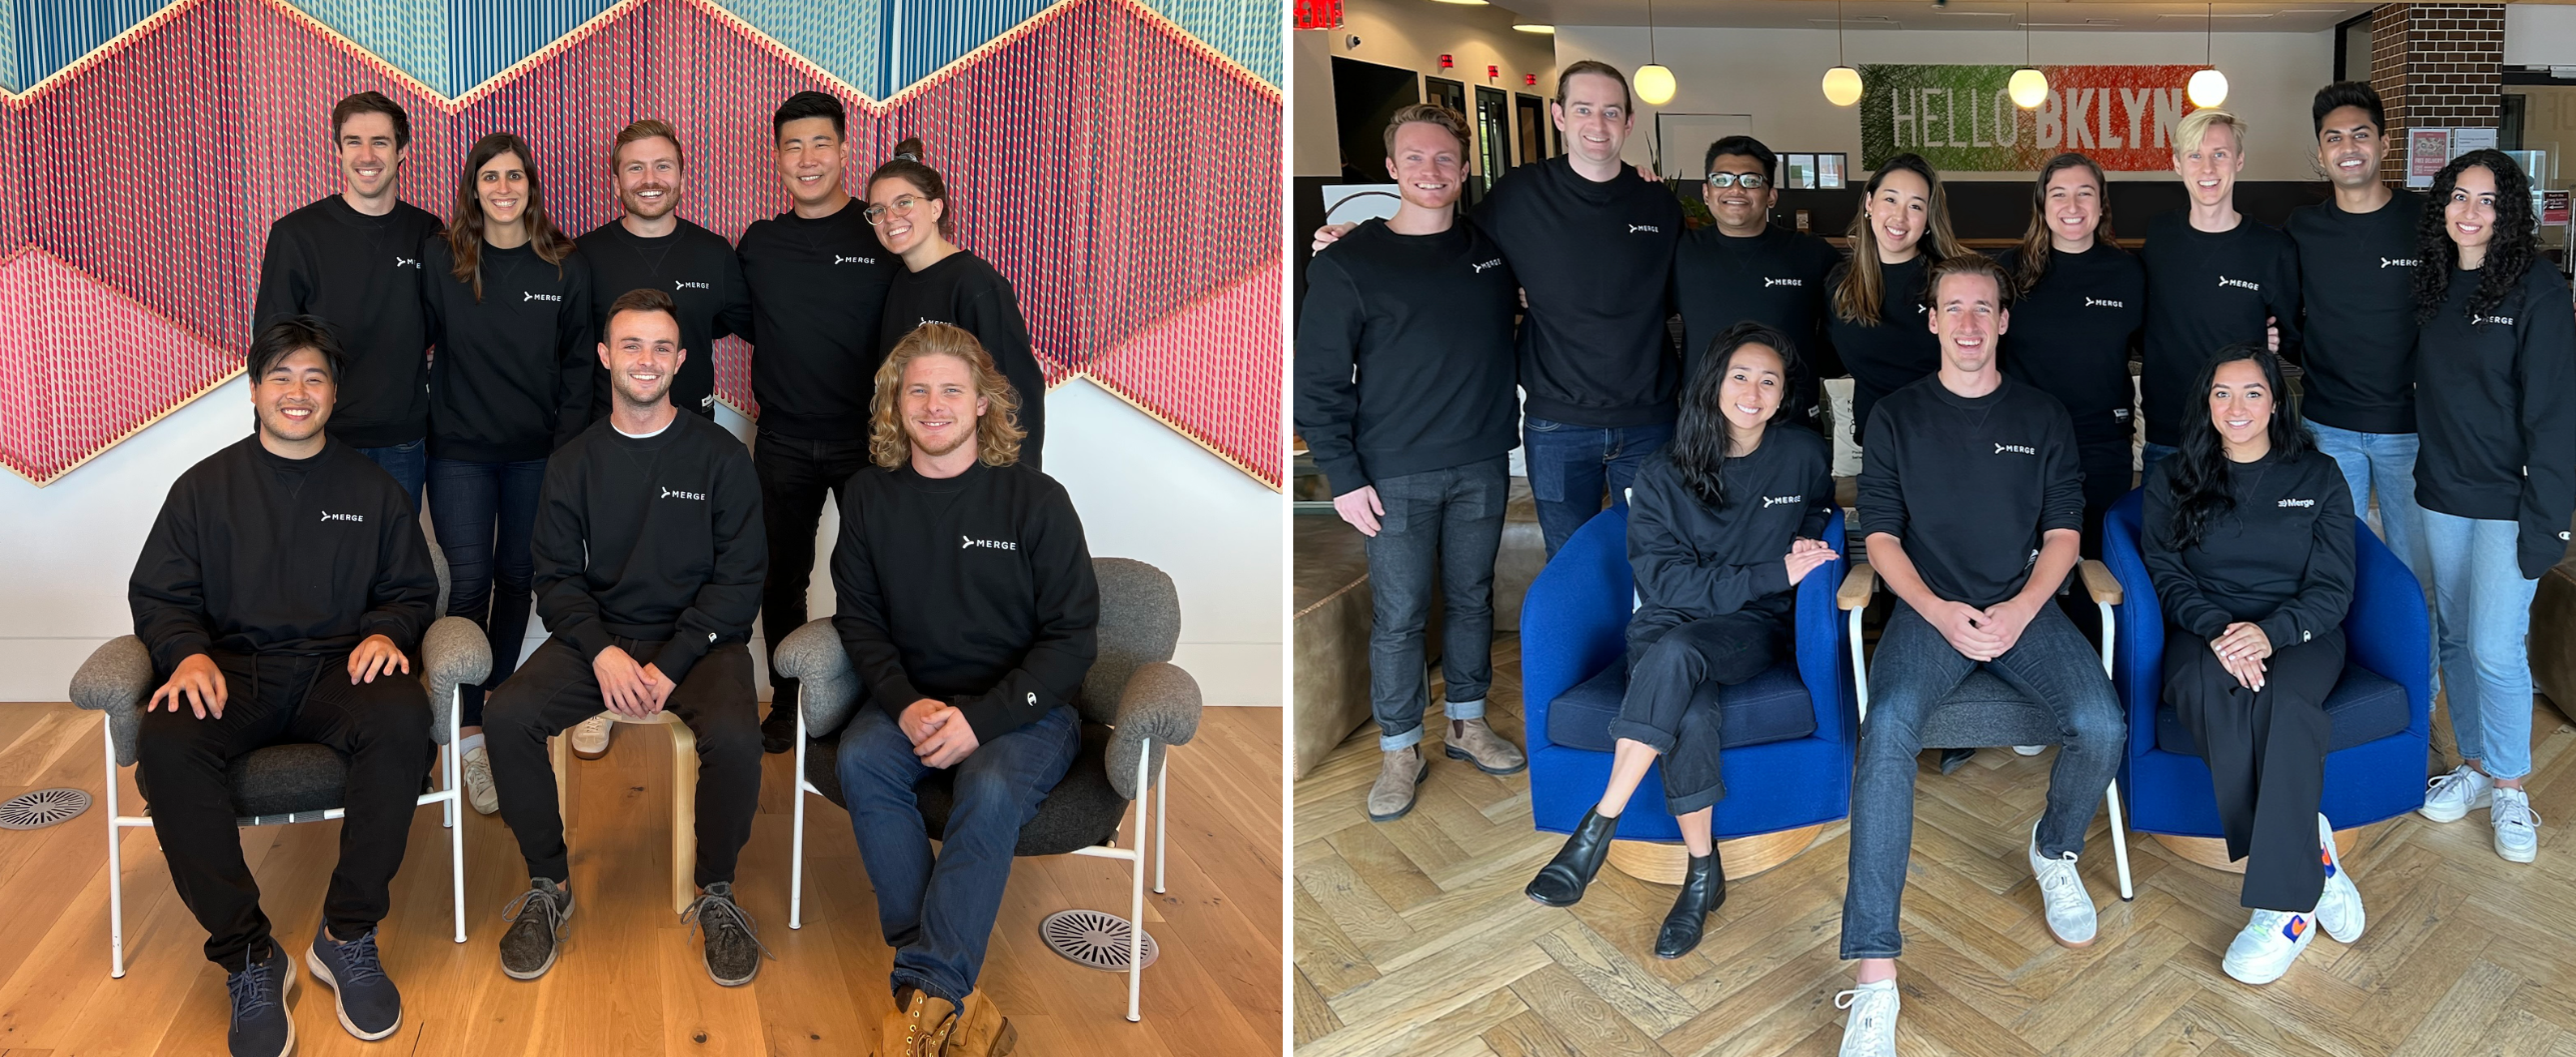 Photos of the Merge team in San Francisco and New York City